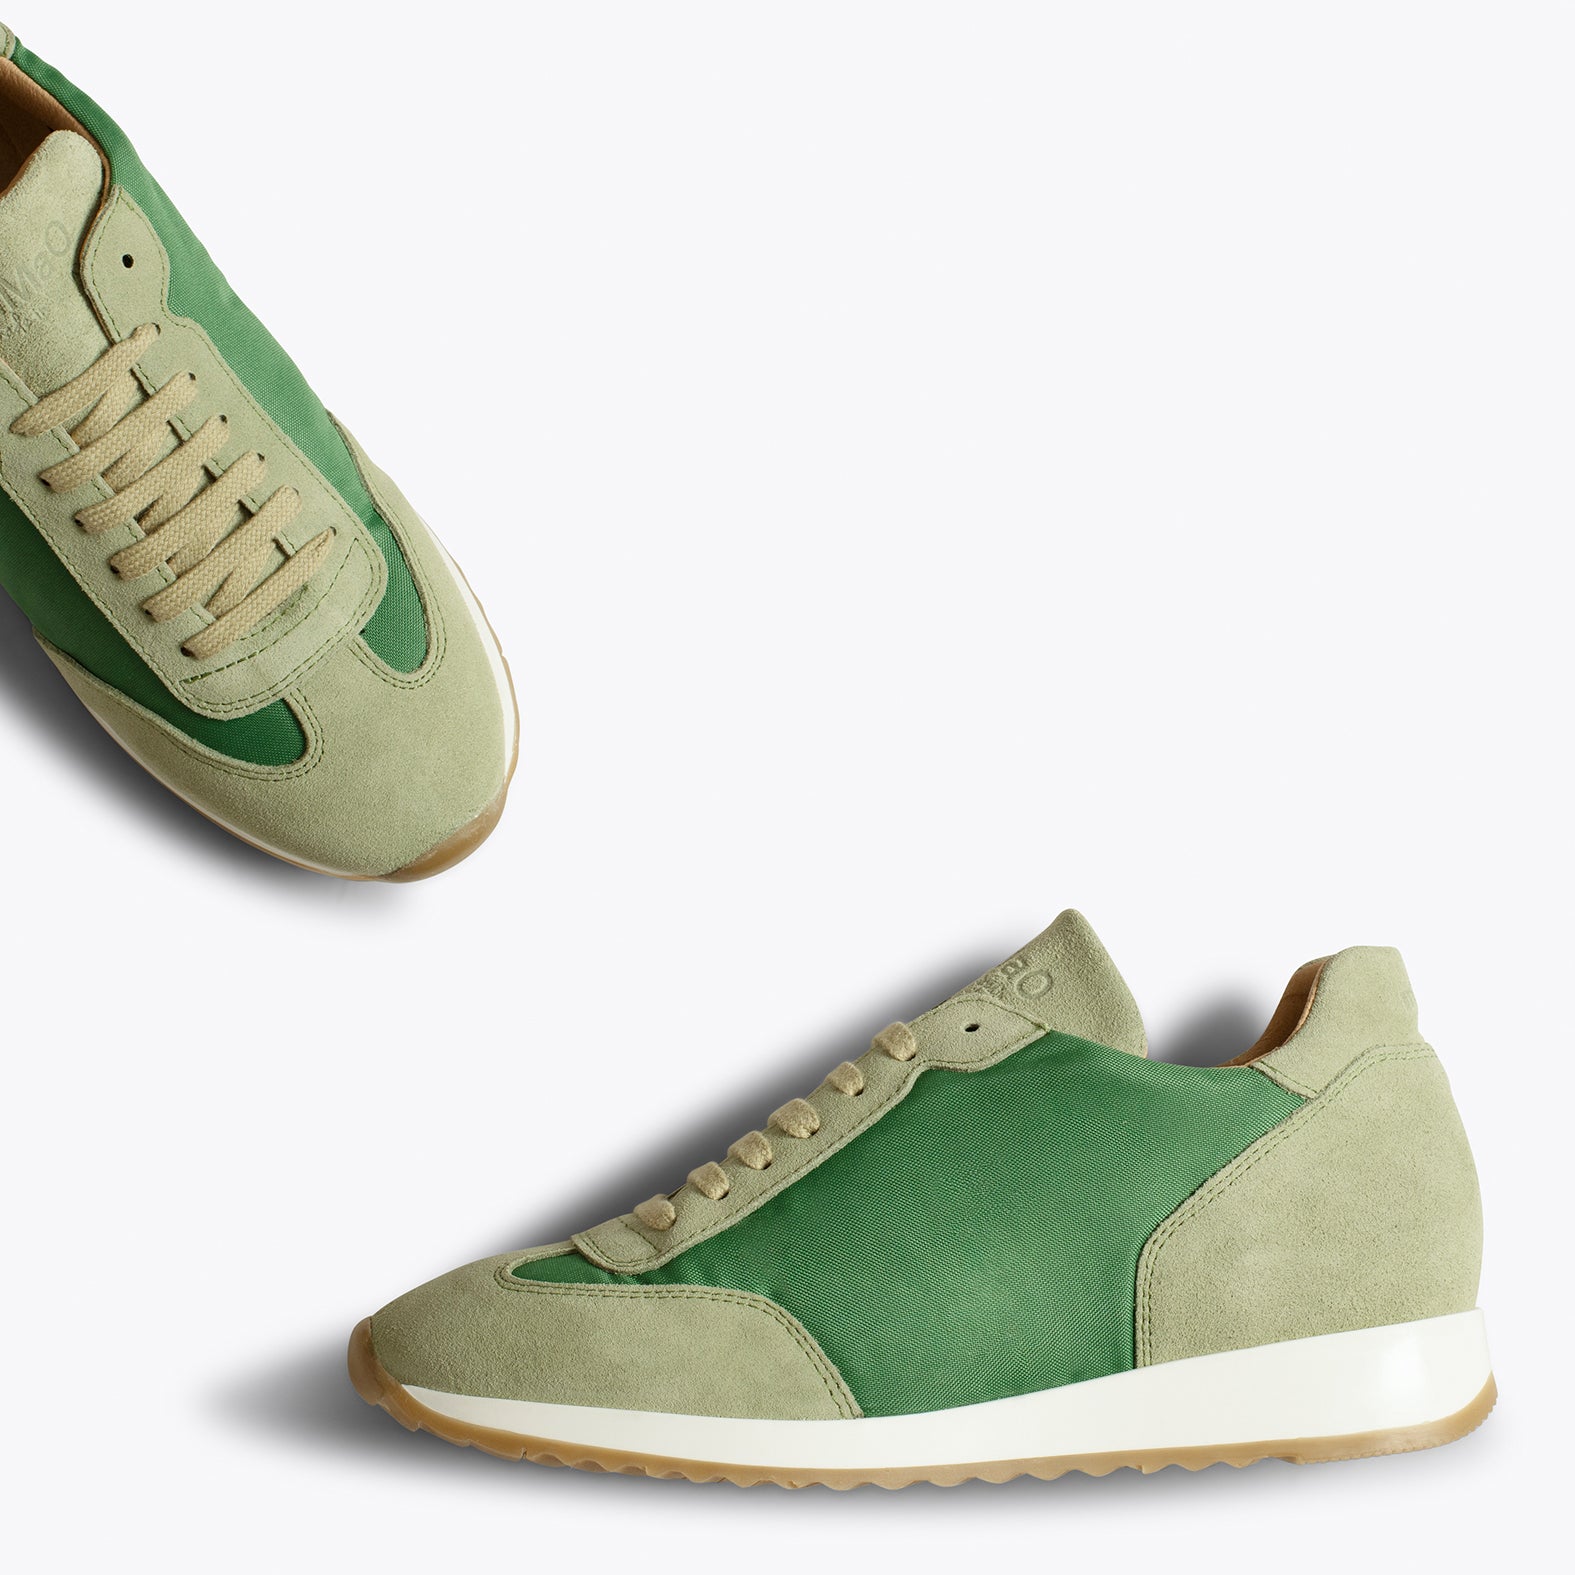 CASUAL – GREEN sneaker with nylon details